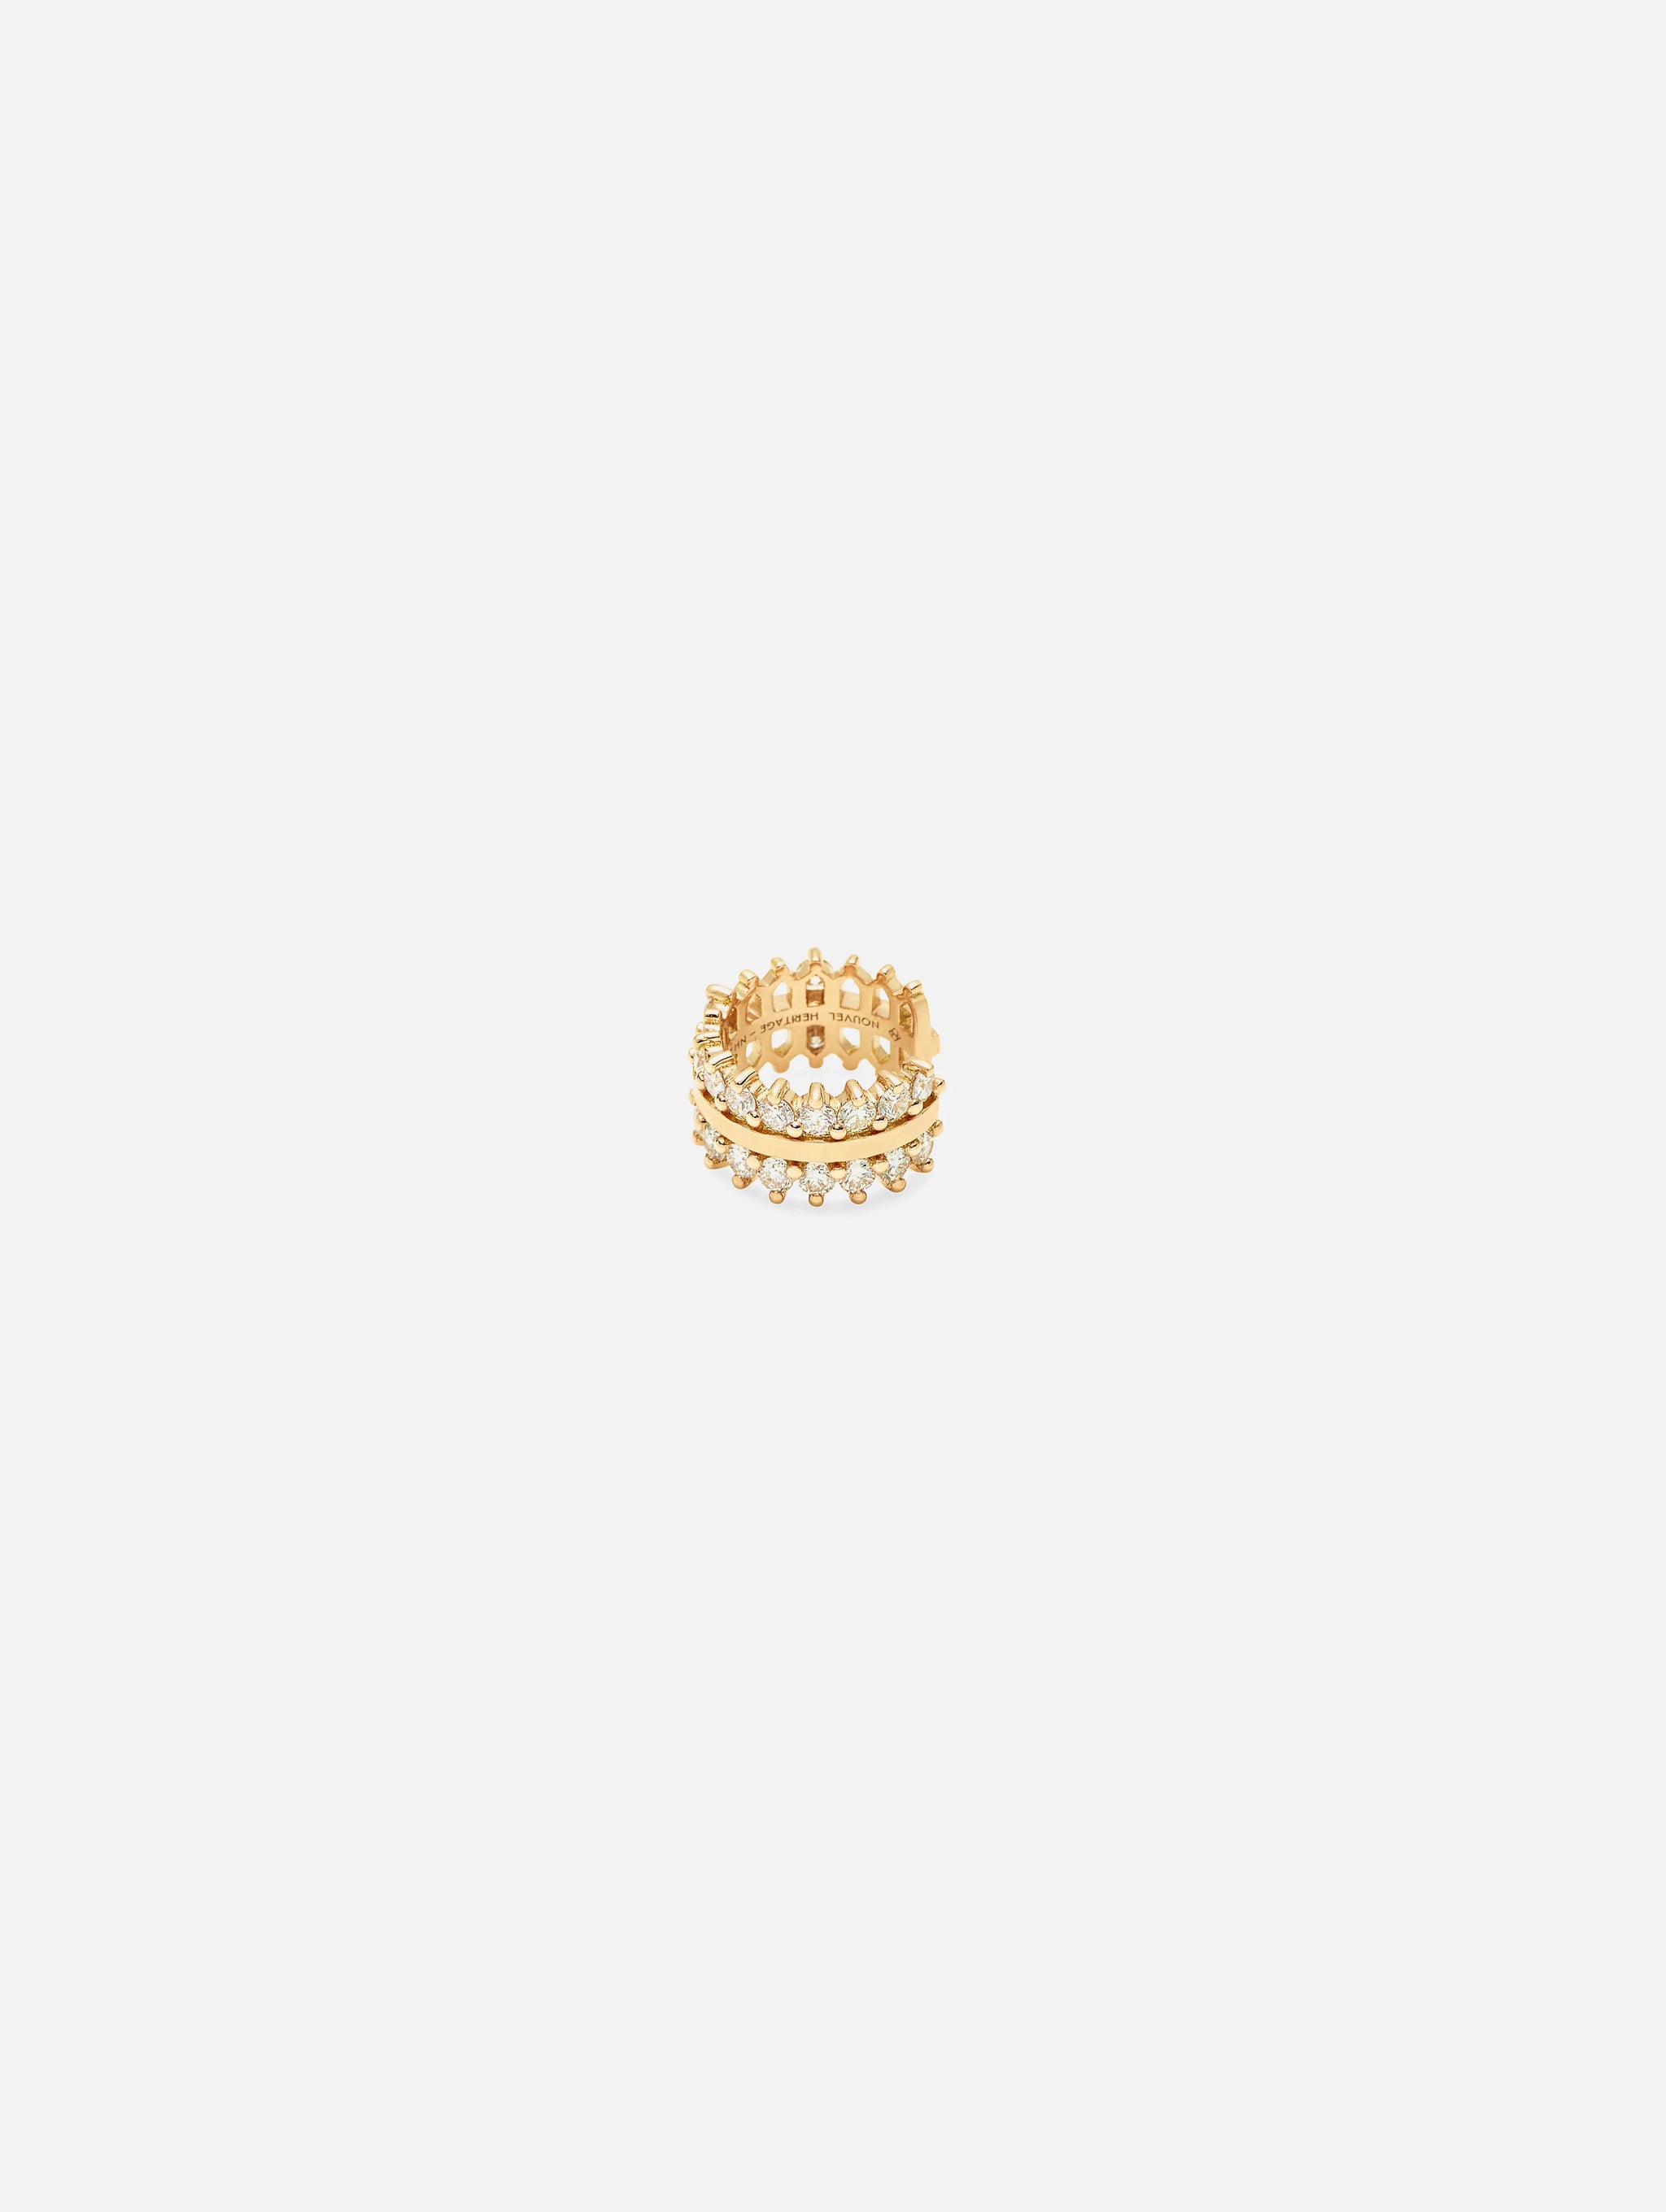 Double Full Diamond Ear Cuff in Yellow Gold - Nouvel Heritage - Nouvel Heritage